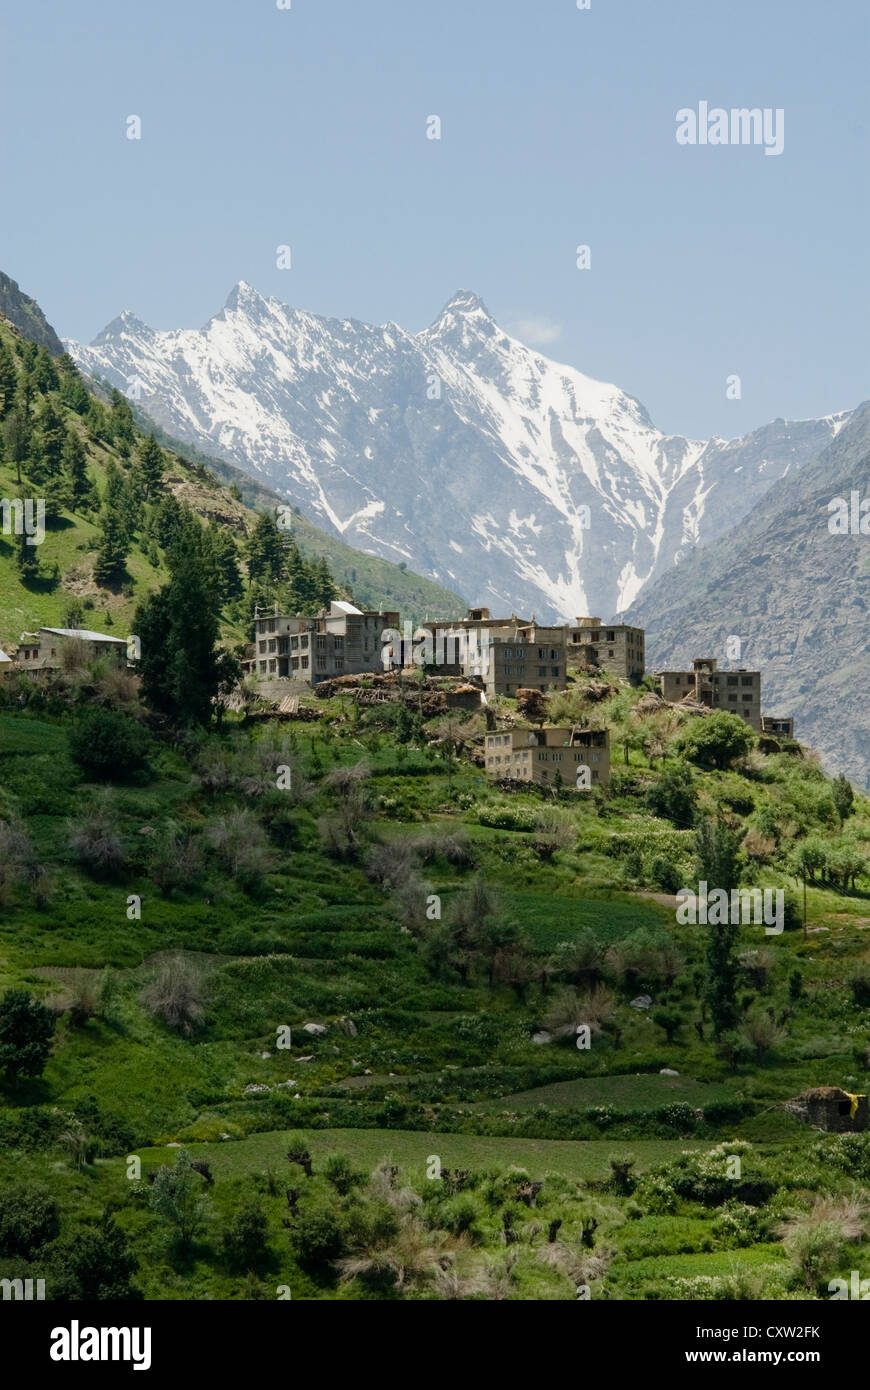 Located in Lahaul Valley, Himachal Pradesh in India, Kardang Village offers  stunning views of the surrounding Himalayan landscapes and it